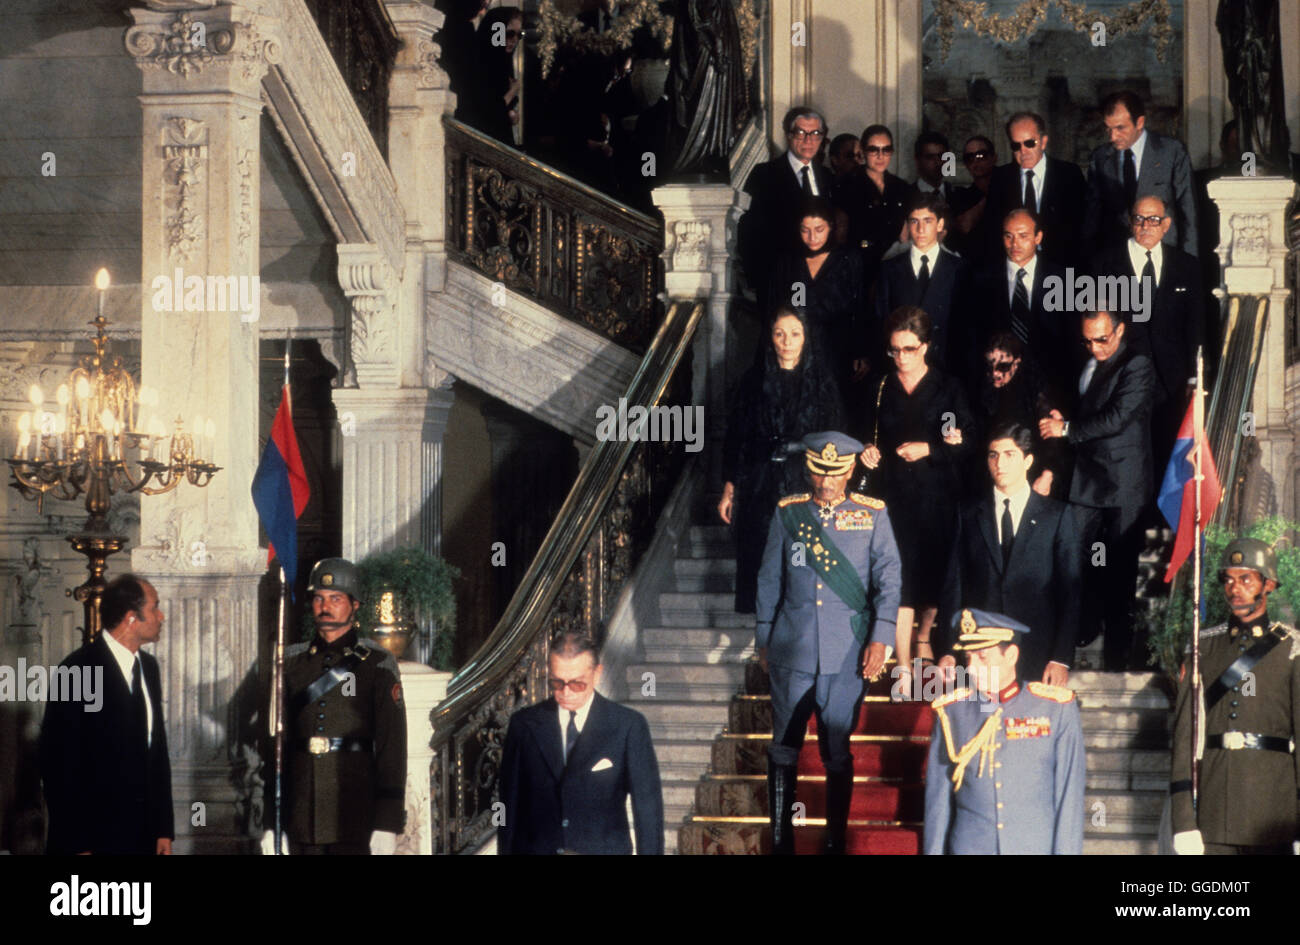 Shah of Iran his state funeral Cairo Egypt. Mohammad Reza Pahlavi, also known as Mohammad Reza Shah. The Shah's  widow and family and President Sadat at front (left) and the Shah's son Reza Pahlavi 1980. The Lying in State at the Abdin Palace. HOMER SYKES Stock Photo